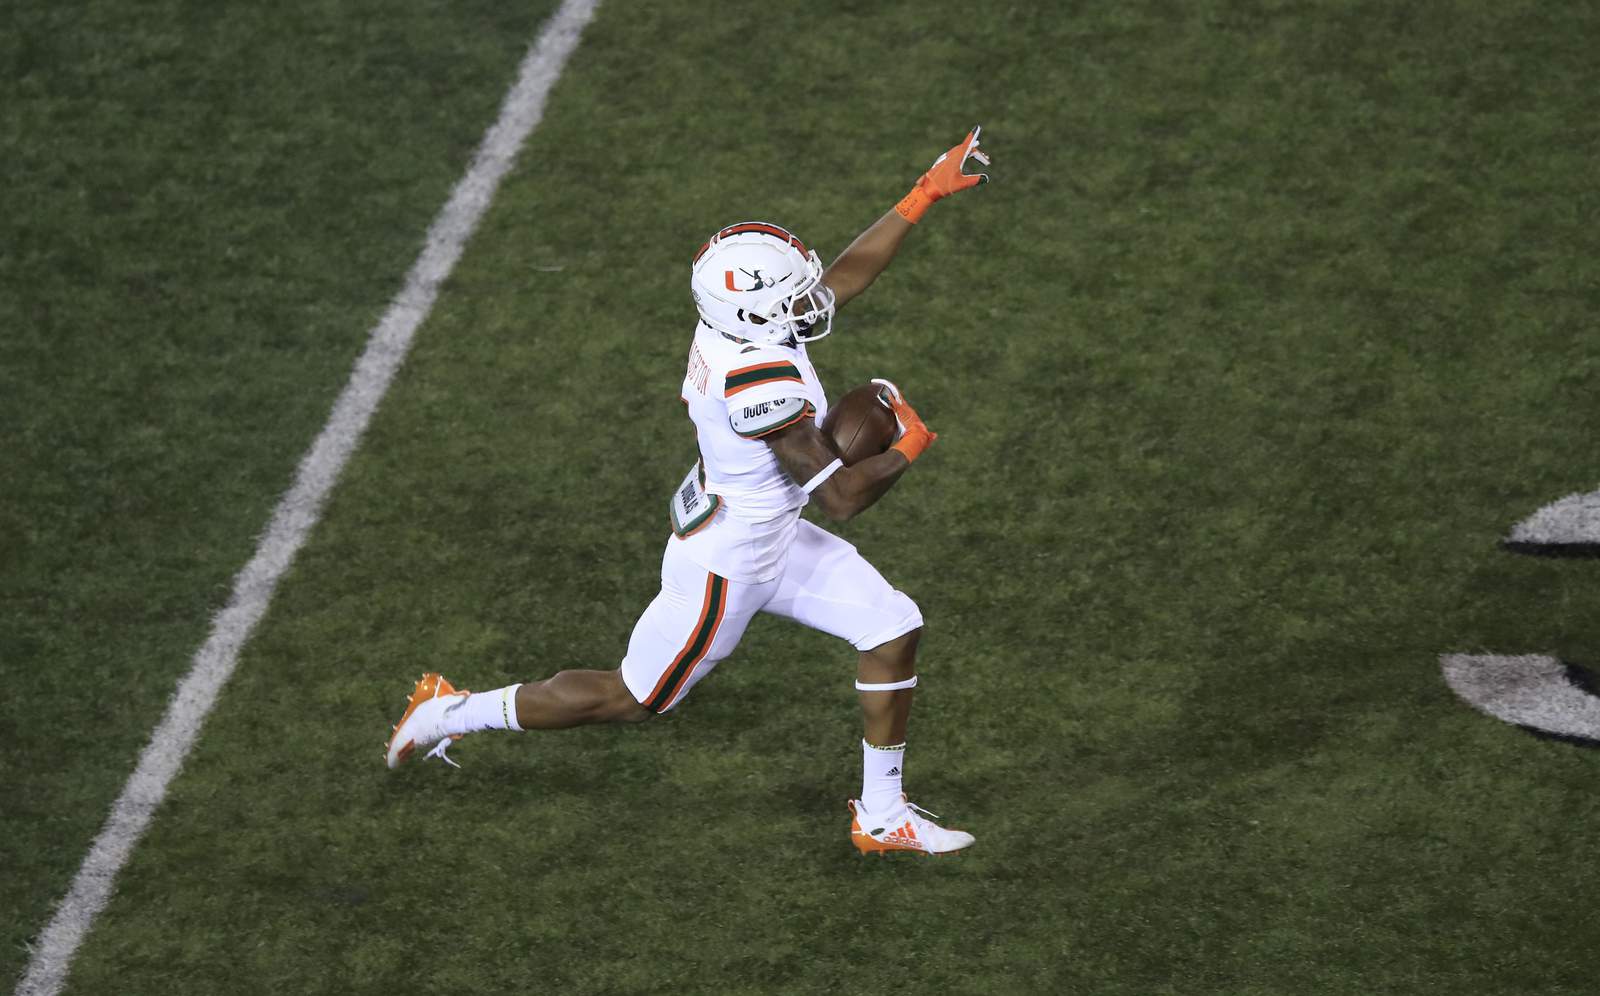 AP Top 25: Hurricanes move up to No. 8 following romp of FSU